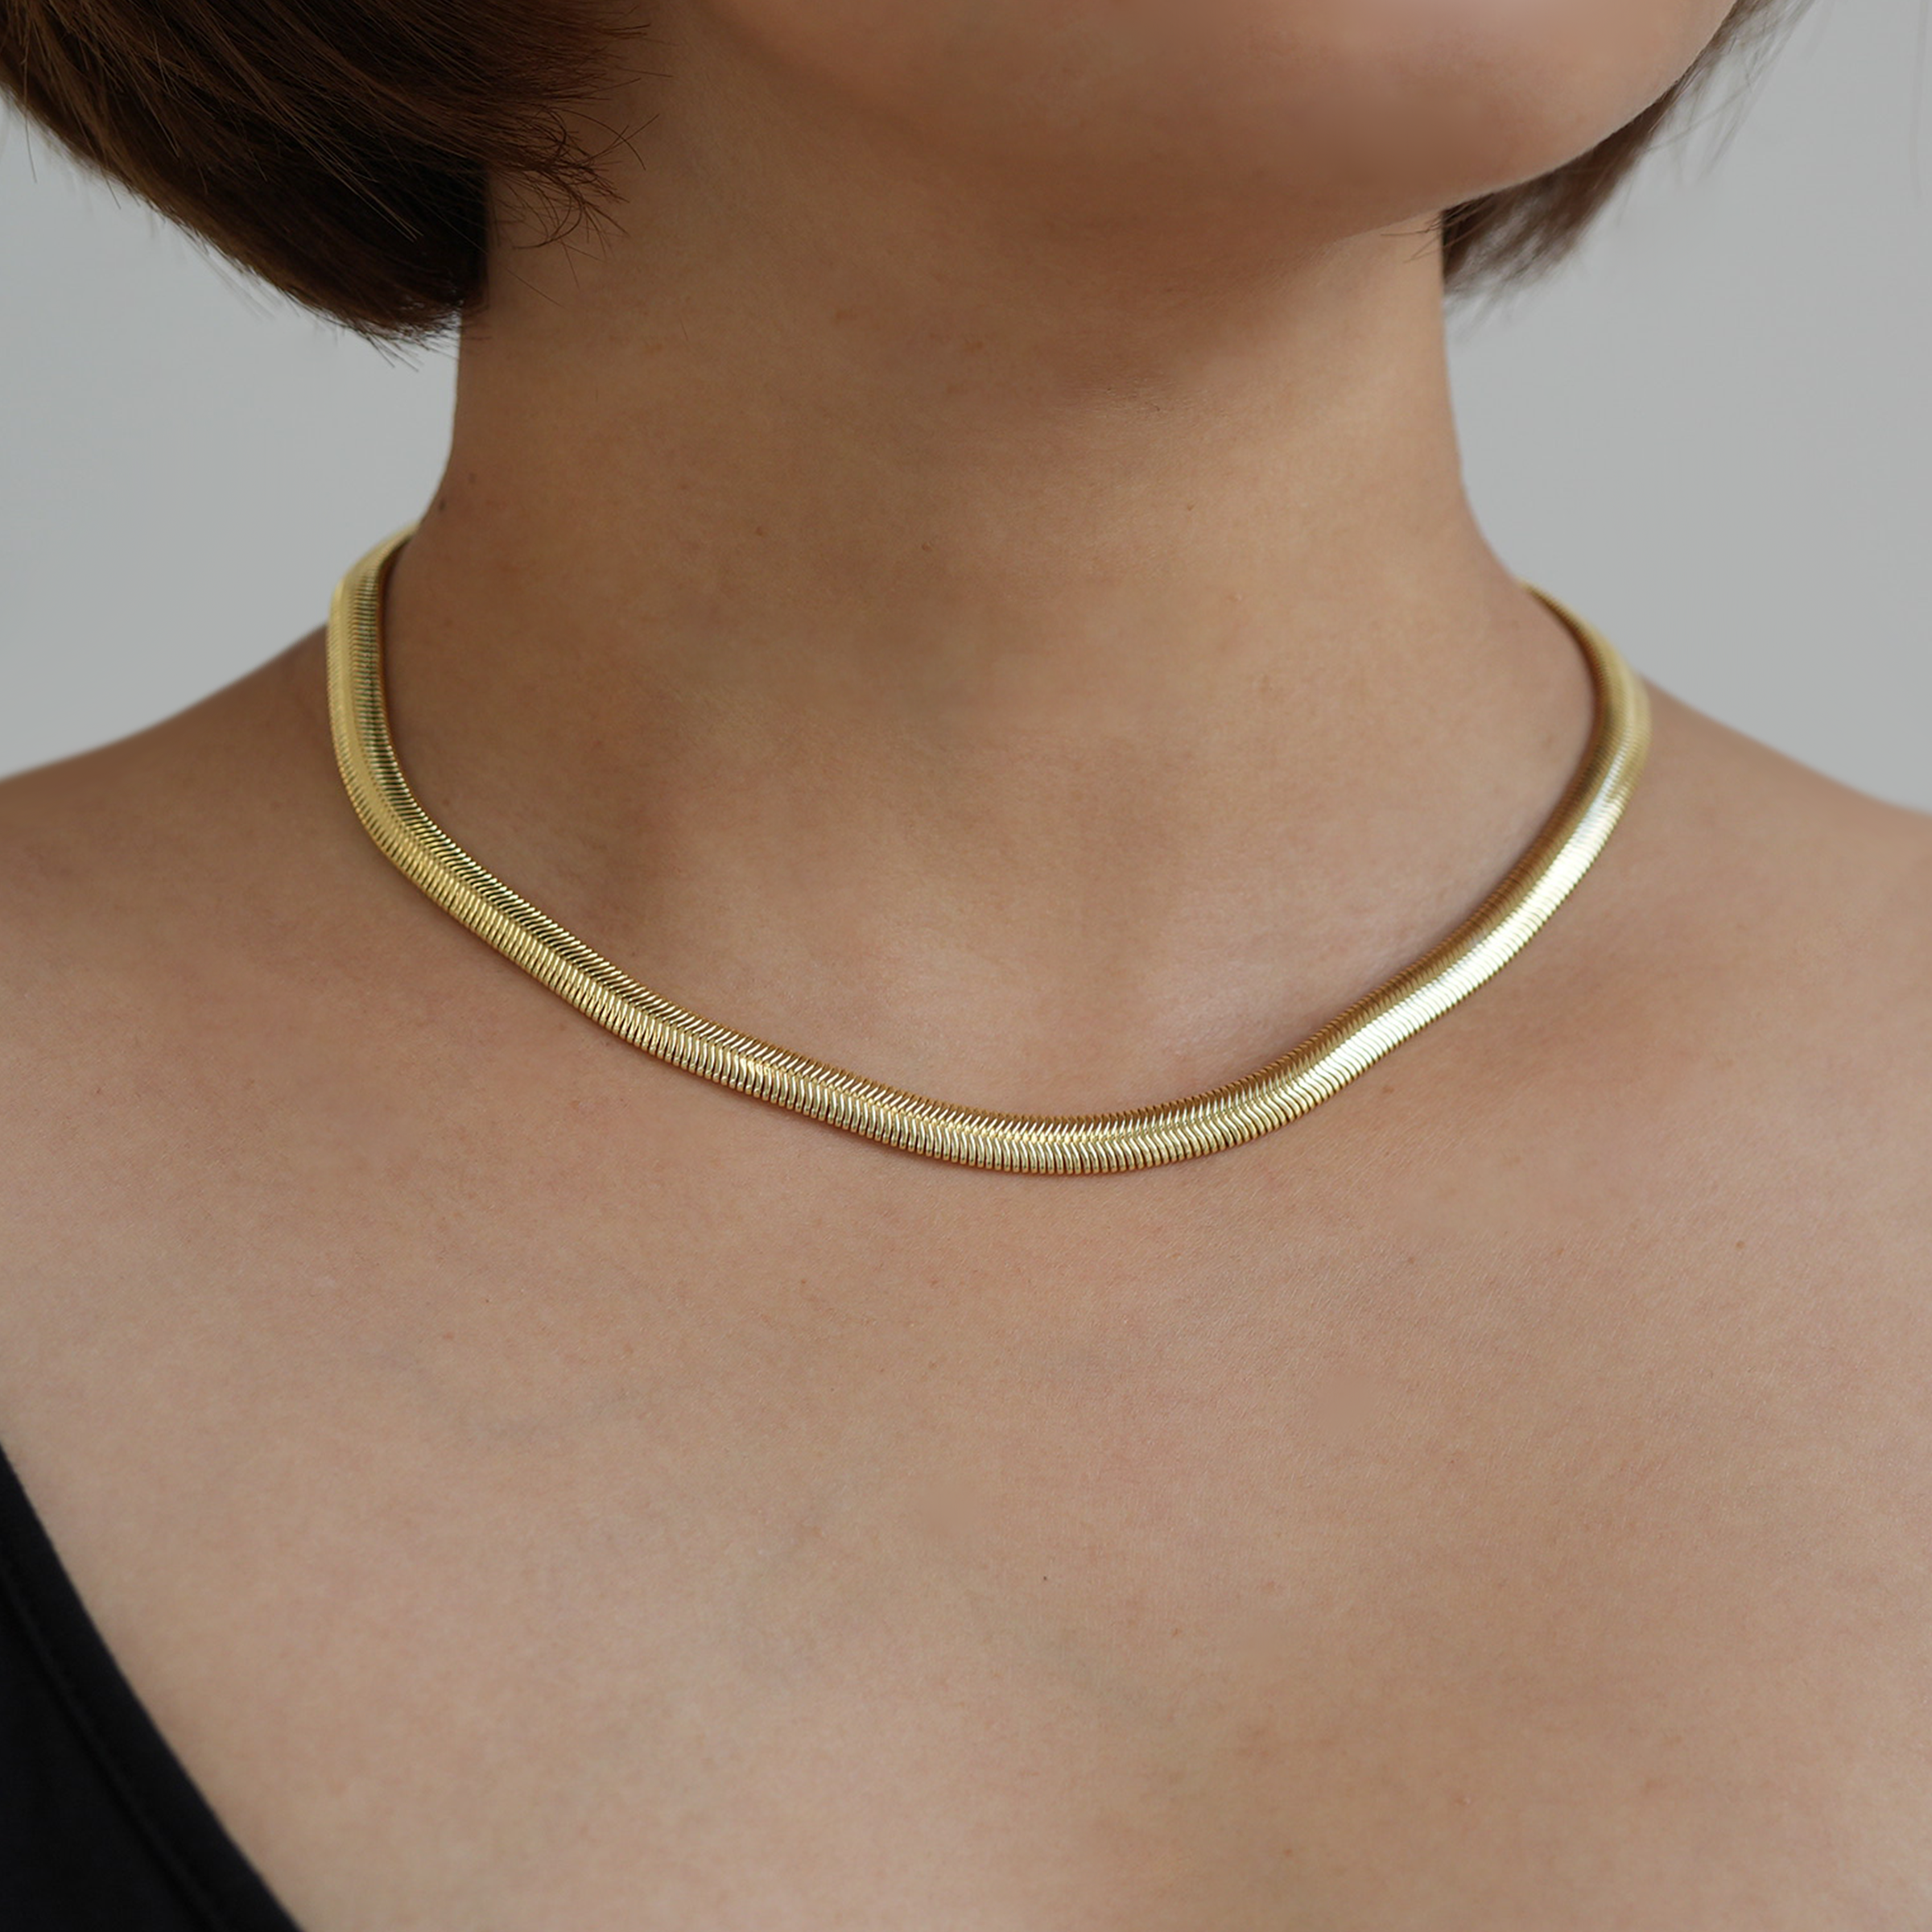 THE THIN ELOISE NECKLACE